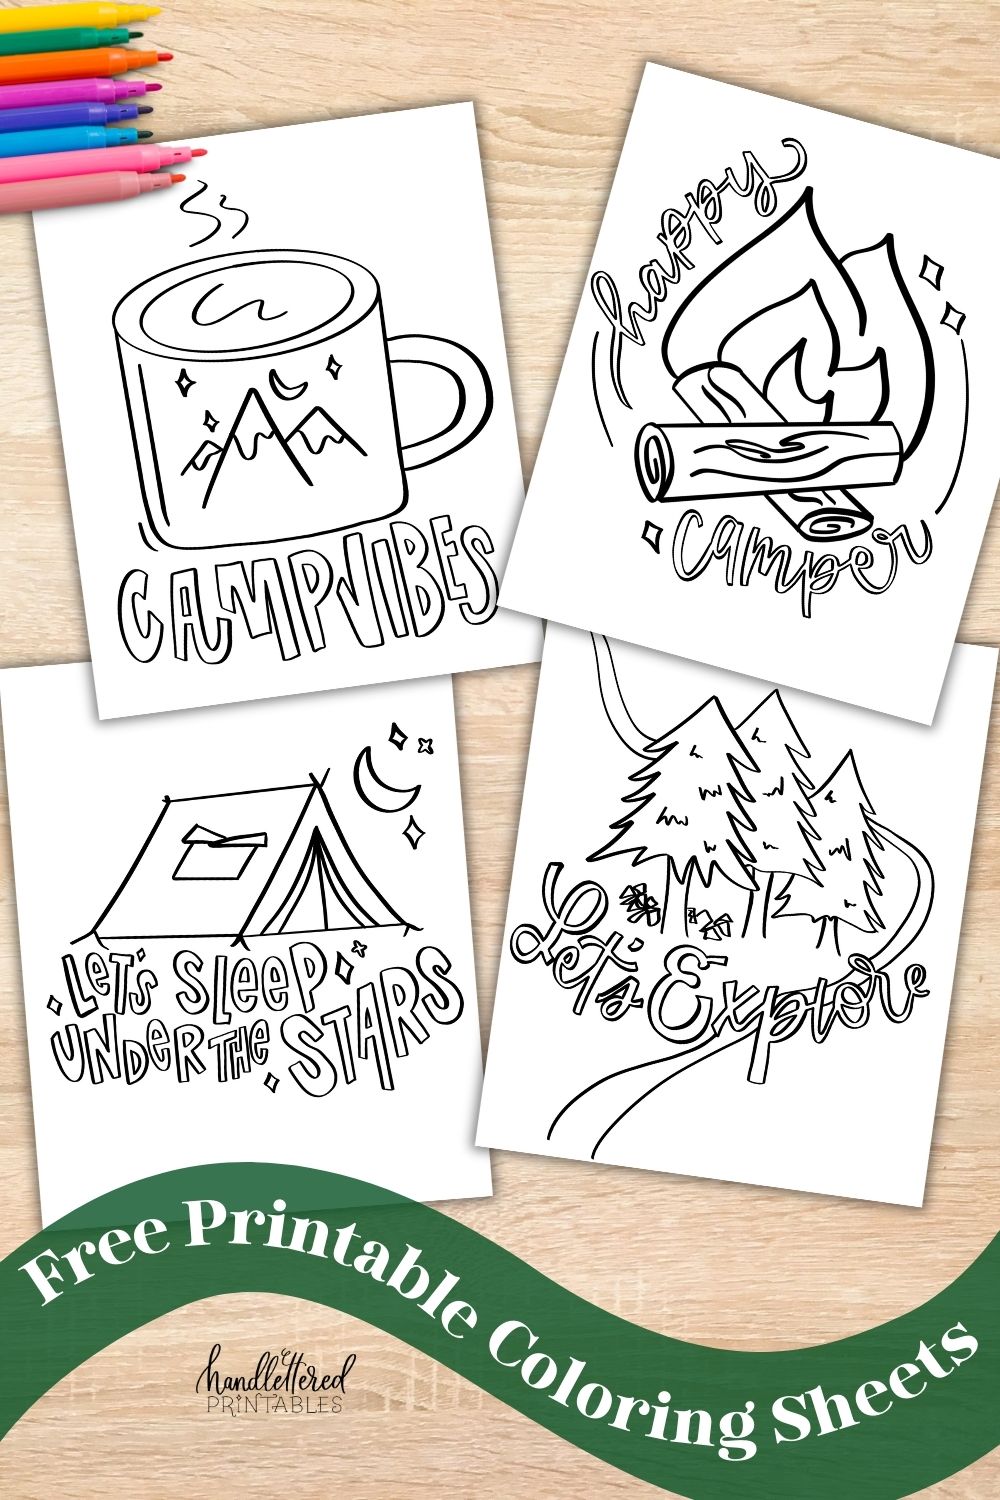 4 camping coloring sheets printed on wooden table with pencil crayons 

Text over reads: free printable coloring sheets